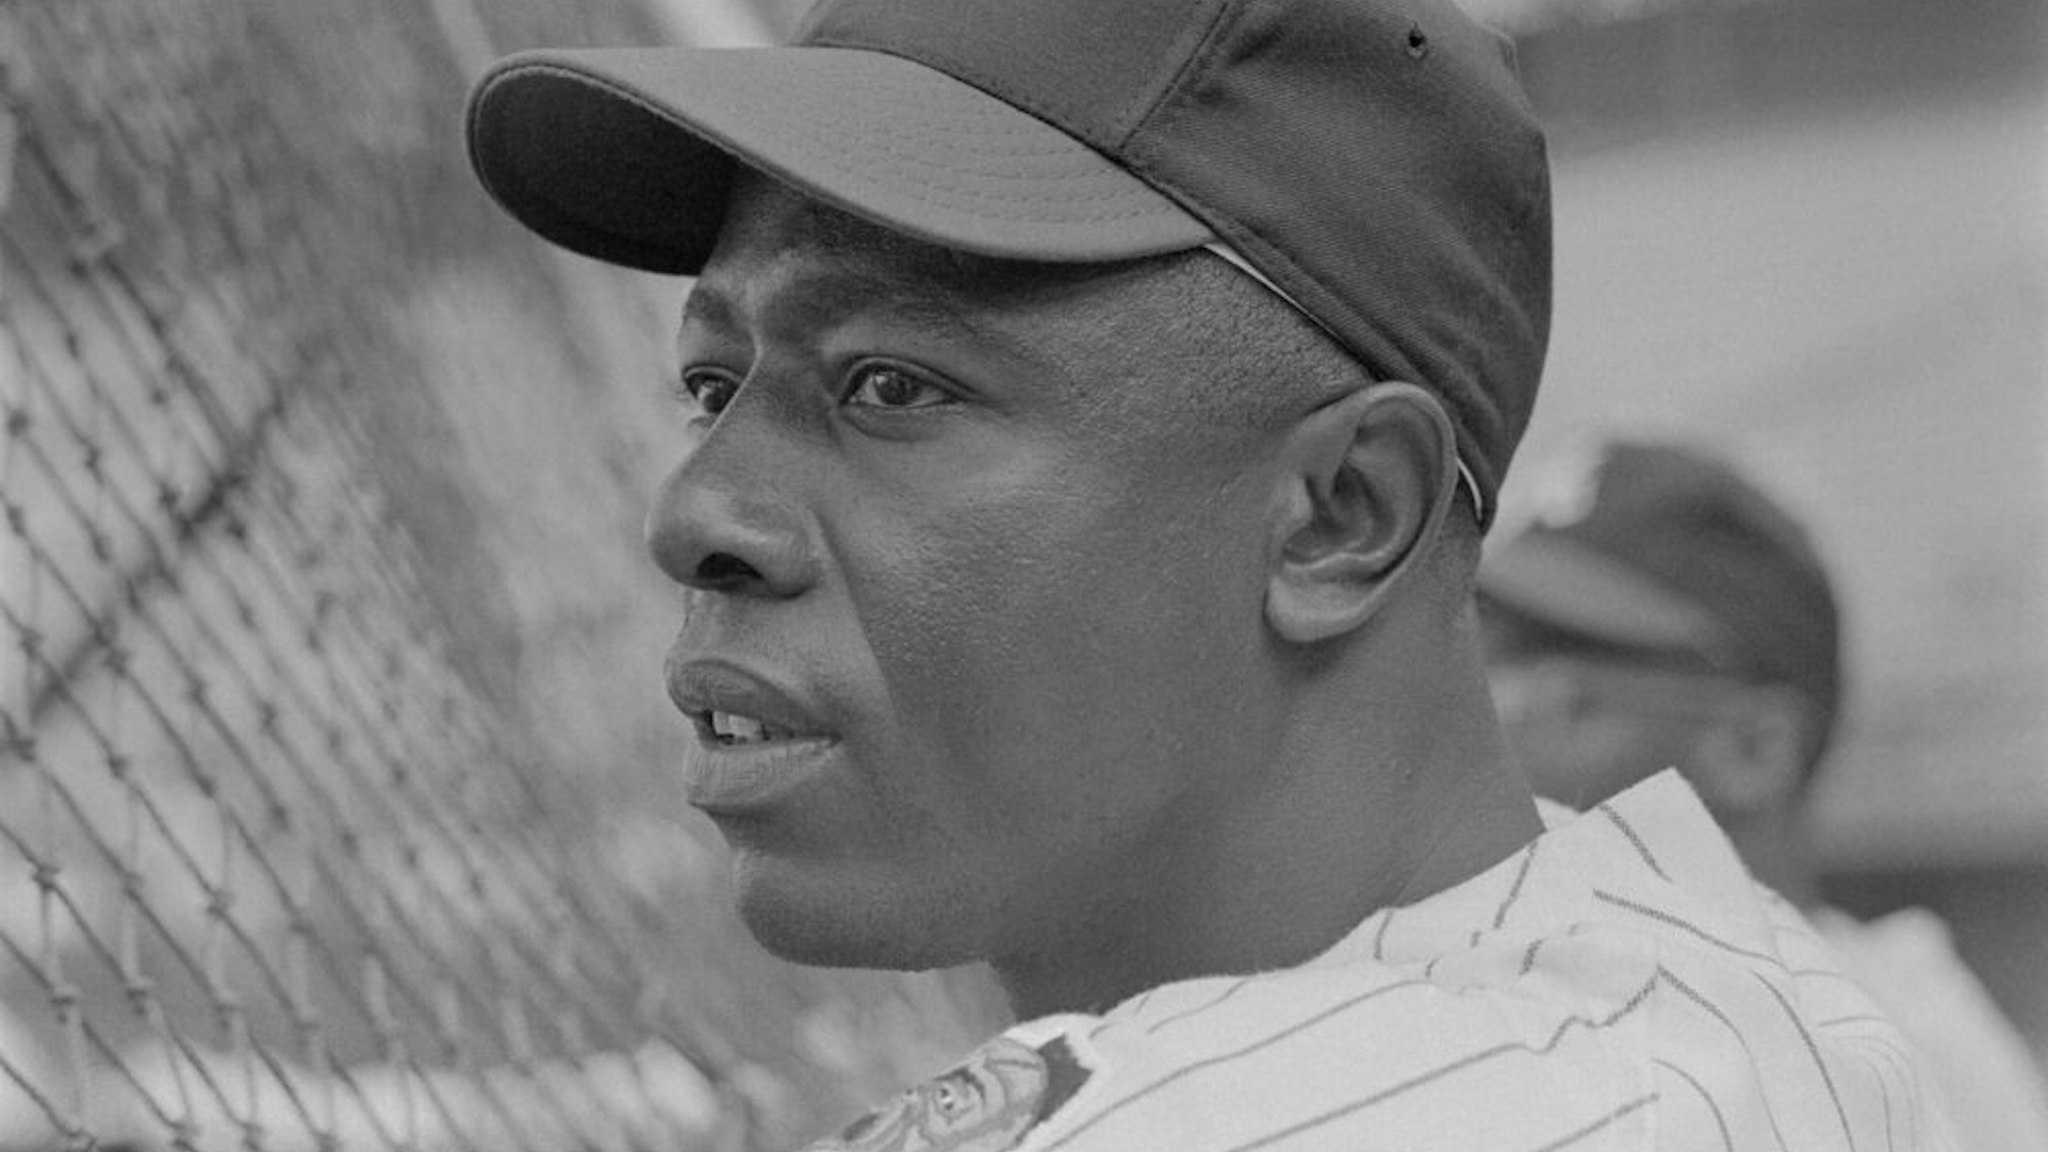 Hank Aaron, the right fielder for the Atlanta Braves, shown in this close up photograph, was named to the National League All Star team for the 16th straight year. It was the 13th time he was named to the starting outfield. Aaron is the only repeater picked. Hank is shown in the batting cage before the start of the Braves-Phils game in Atlanta. Aaron has the lowest average of his career at .236 when picked.